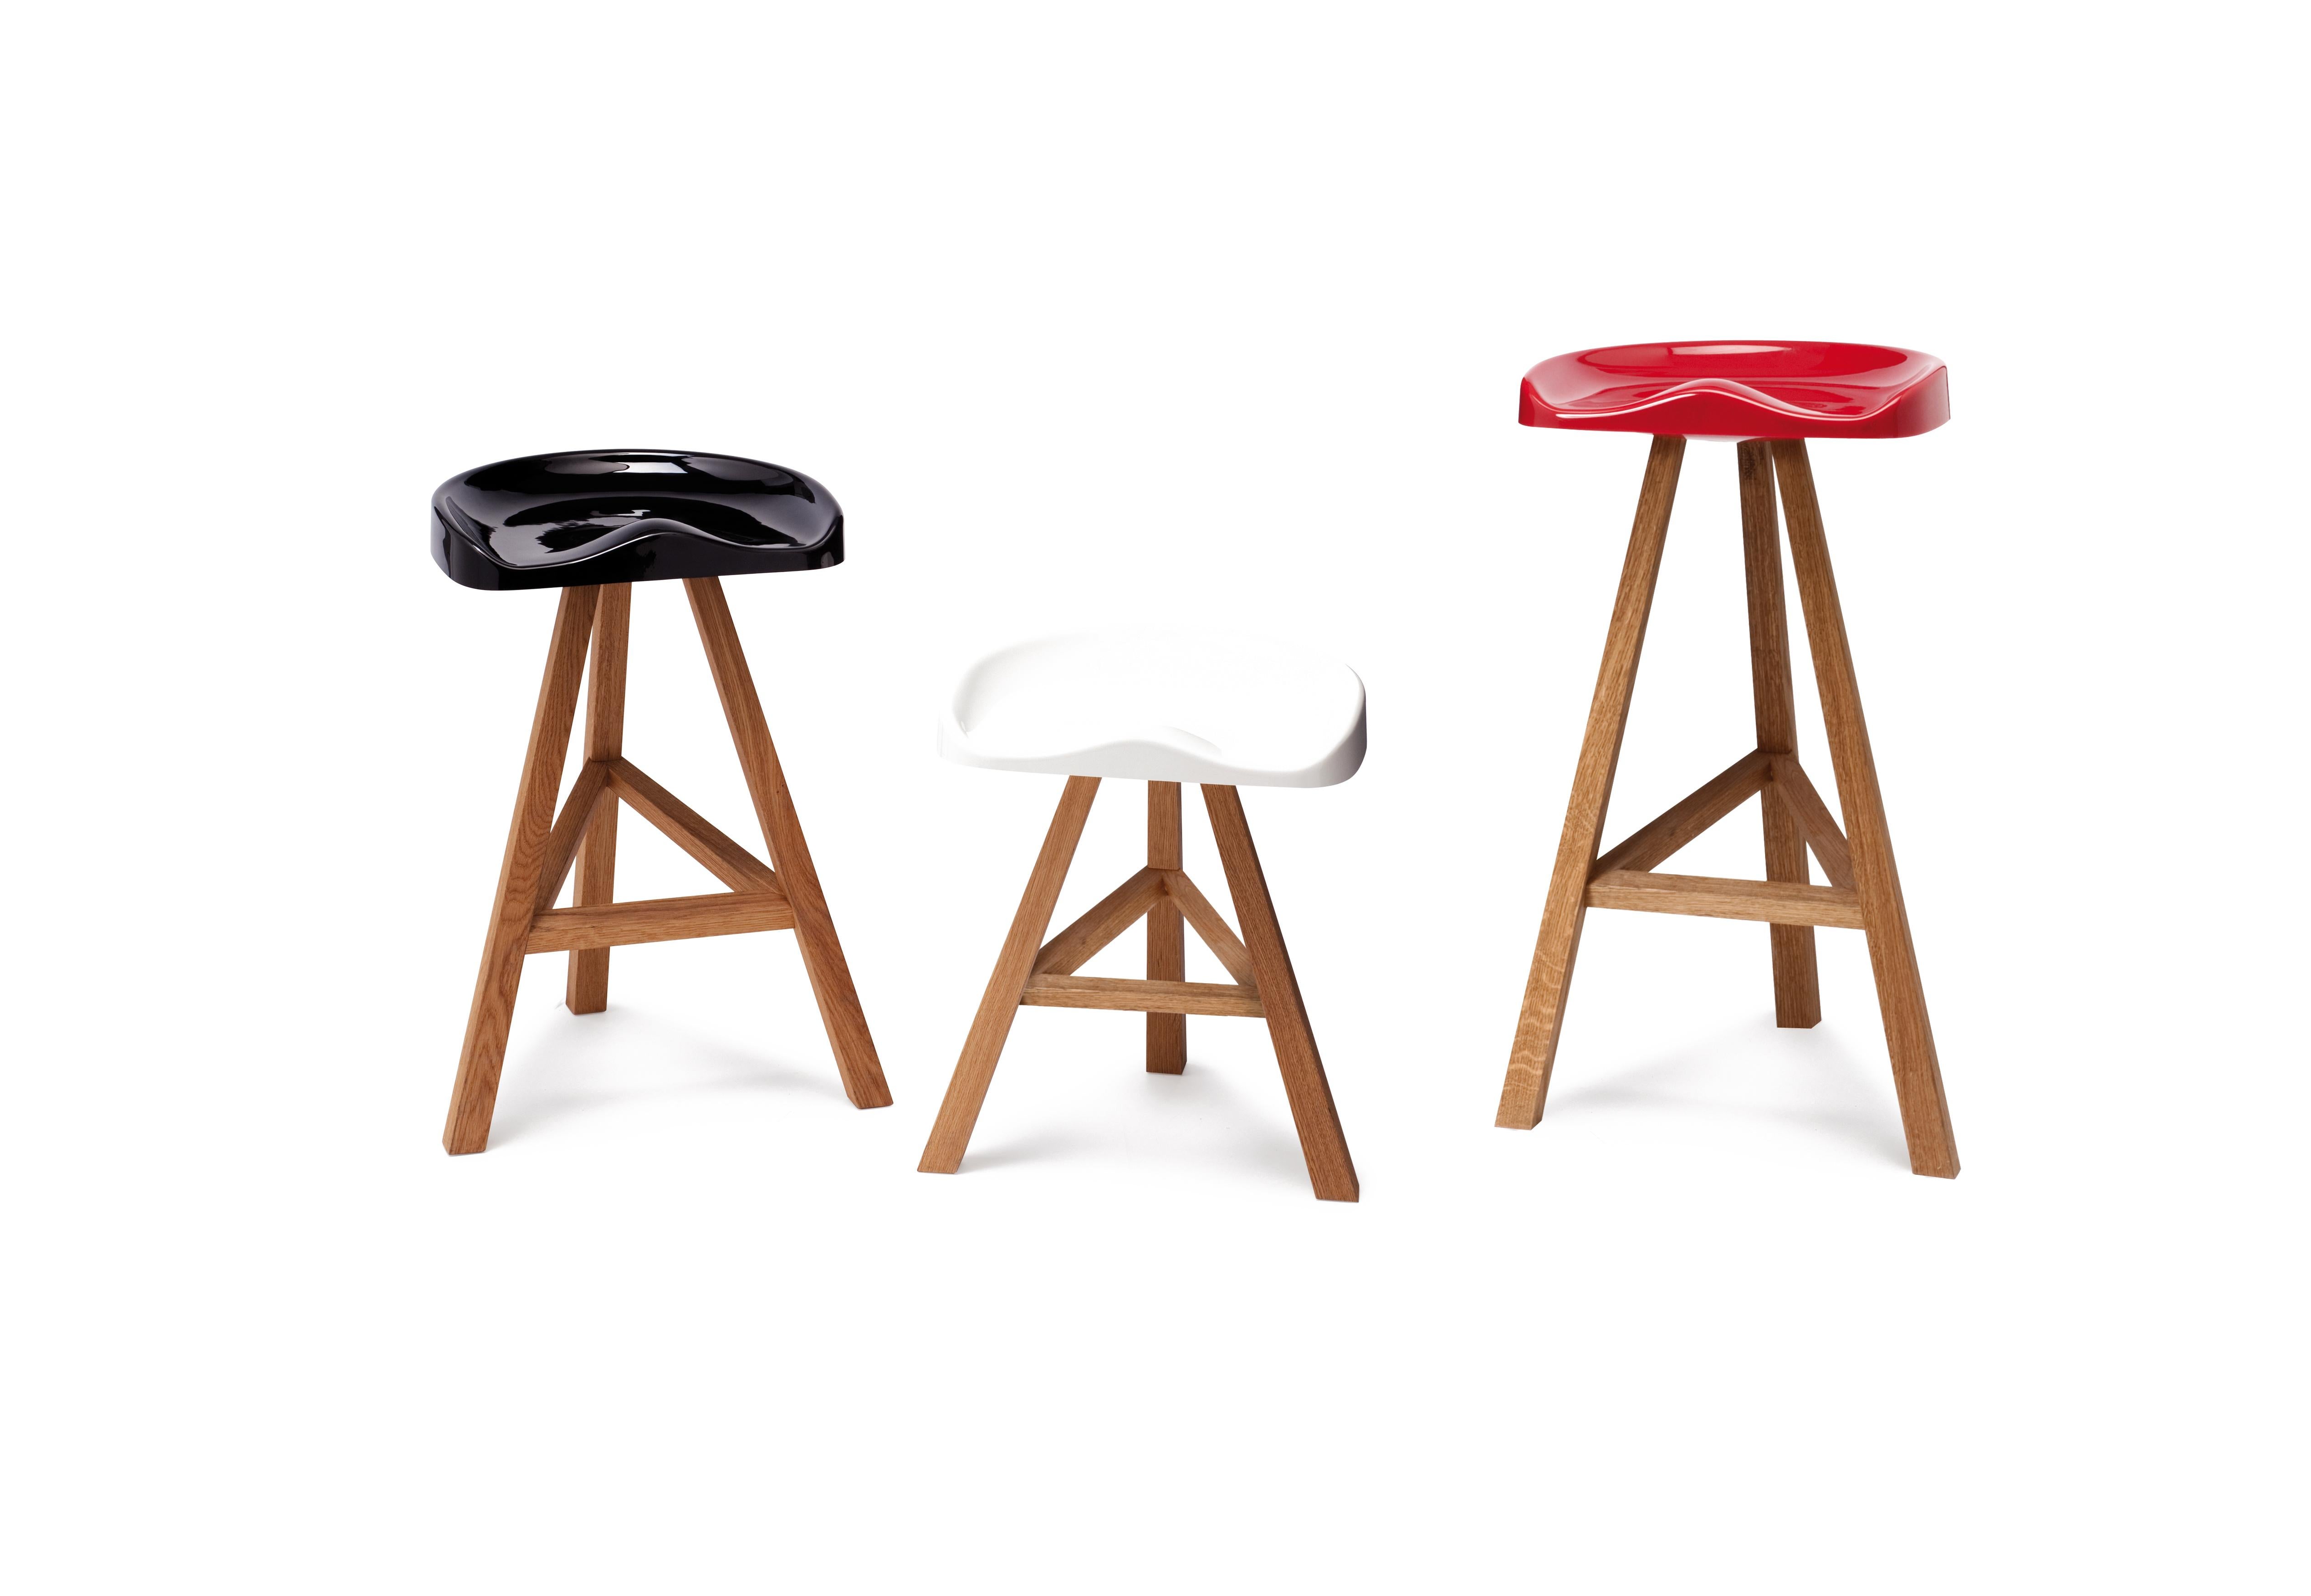 The Heidi is a fun stool that takes its inspiration from the Classic tractor seat and the rustic, three-legged, timber milking stool. Part modern statement, part nostalgia, the solid, colorful molded seat is combined with a sturdy, geometric,